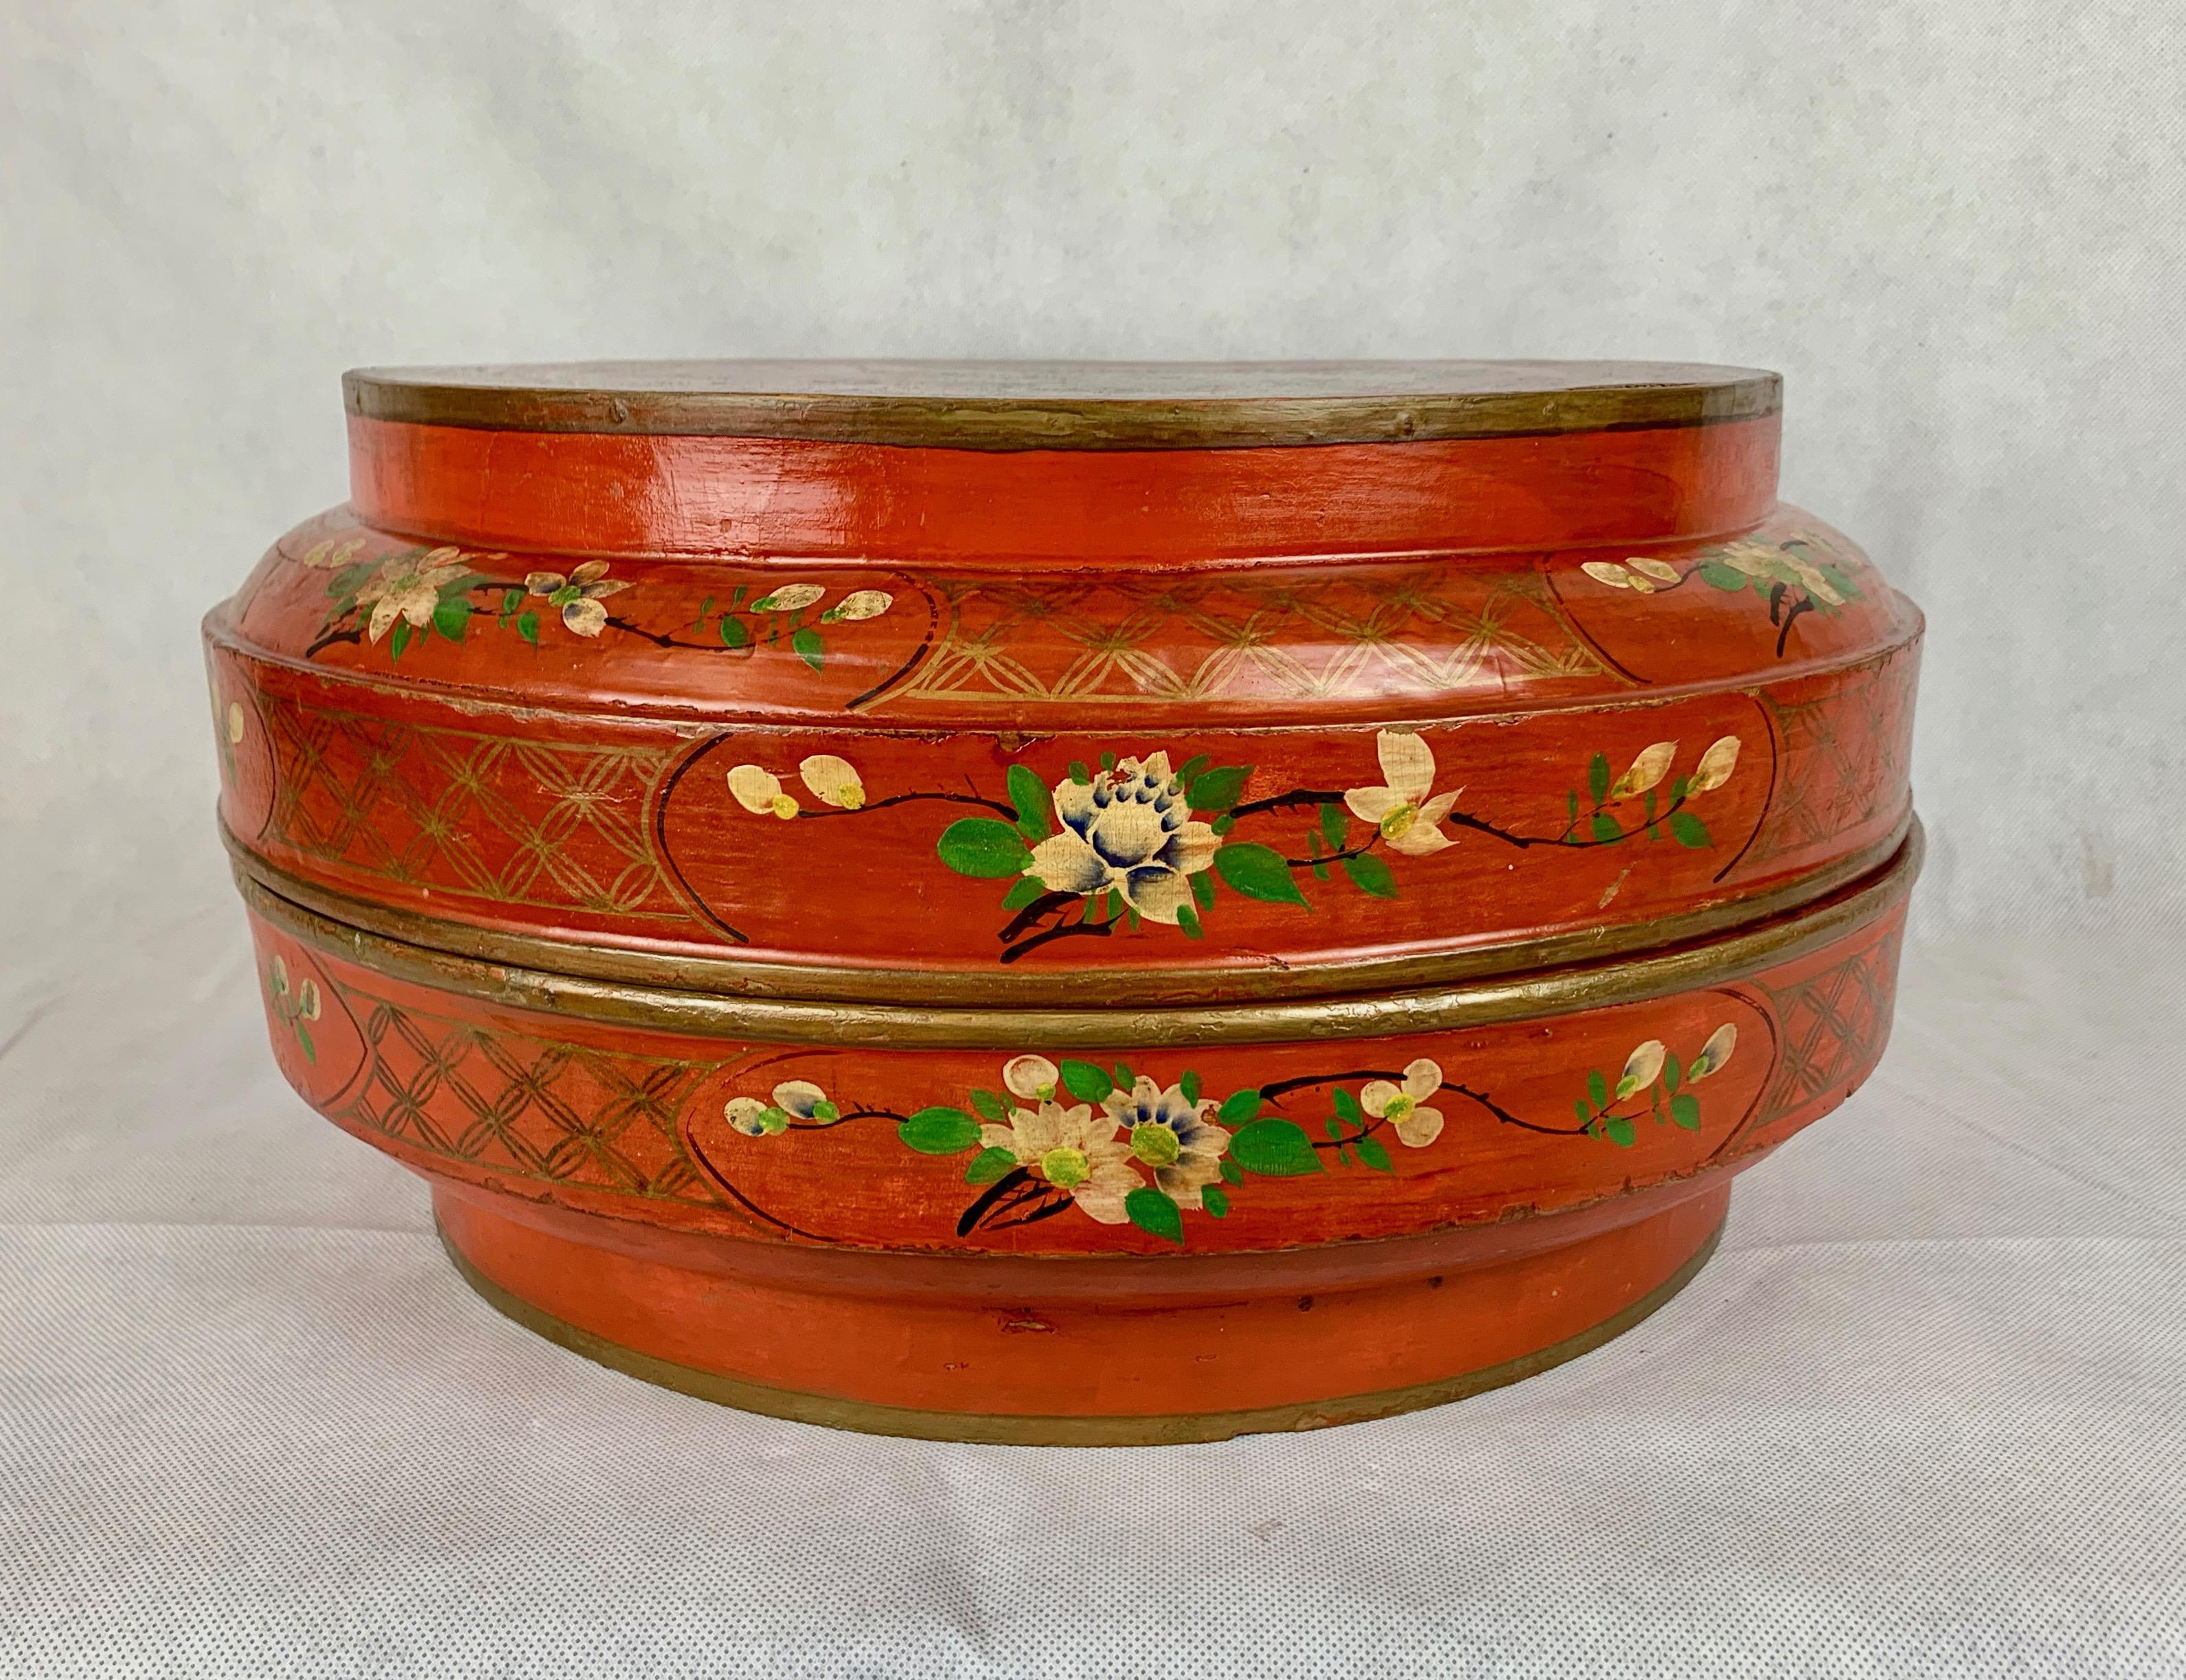 Chinese red lacquer two part wedding box. Entirely hand decorated with a bird and flowers on top and flowers and vines along the side.  The interior is painted a deep apple green along with two Chinese character marks.
Diameter-15.5